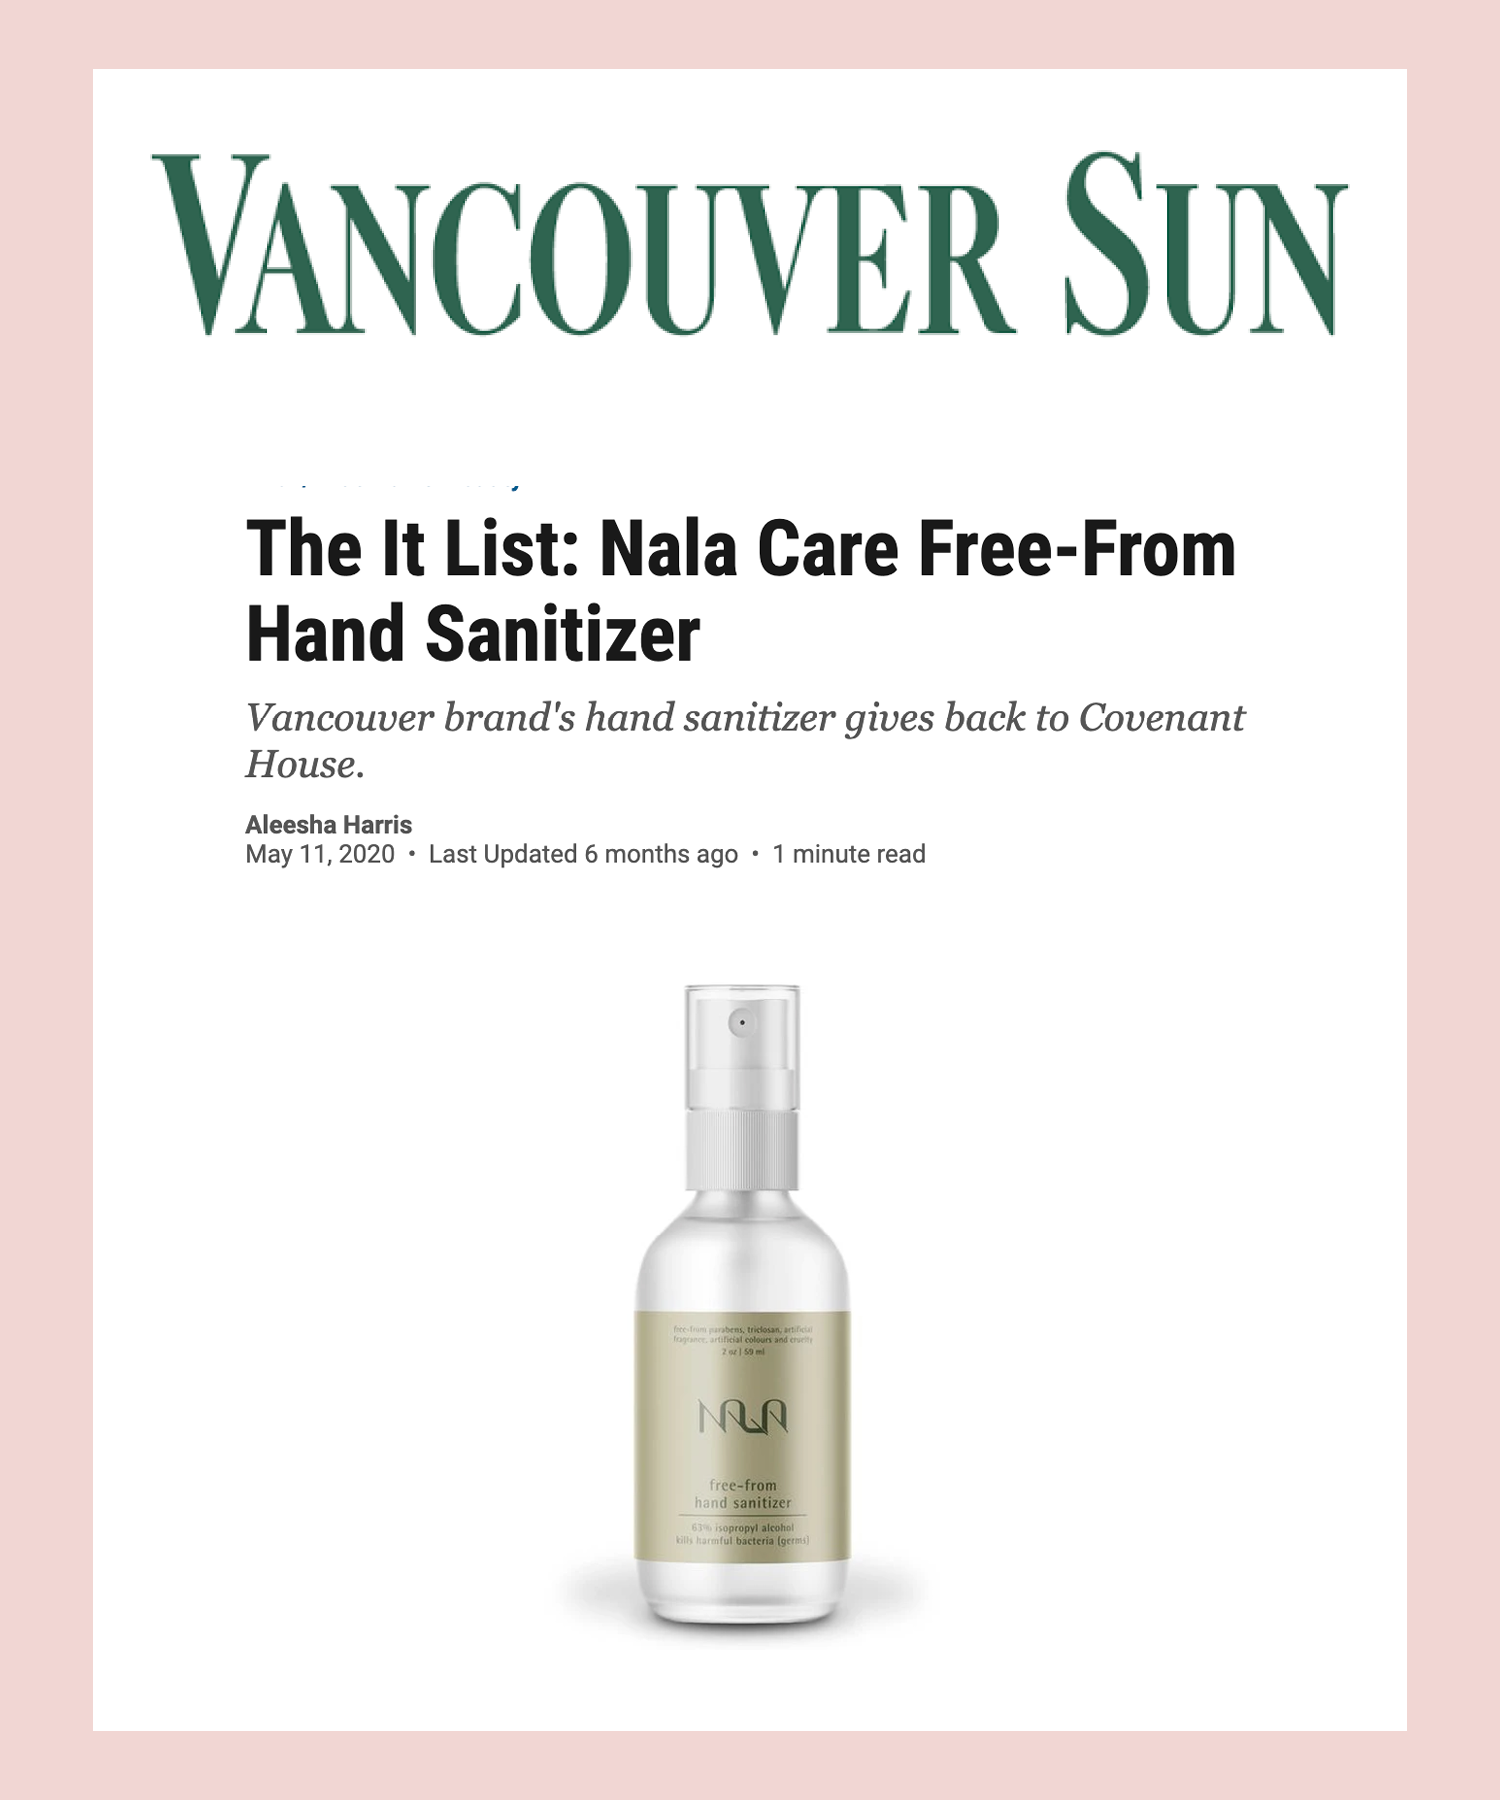 The It List: Nala Care Free-From Hand Sanitizer